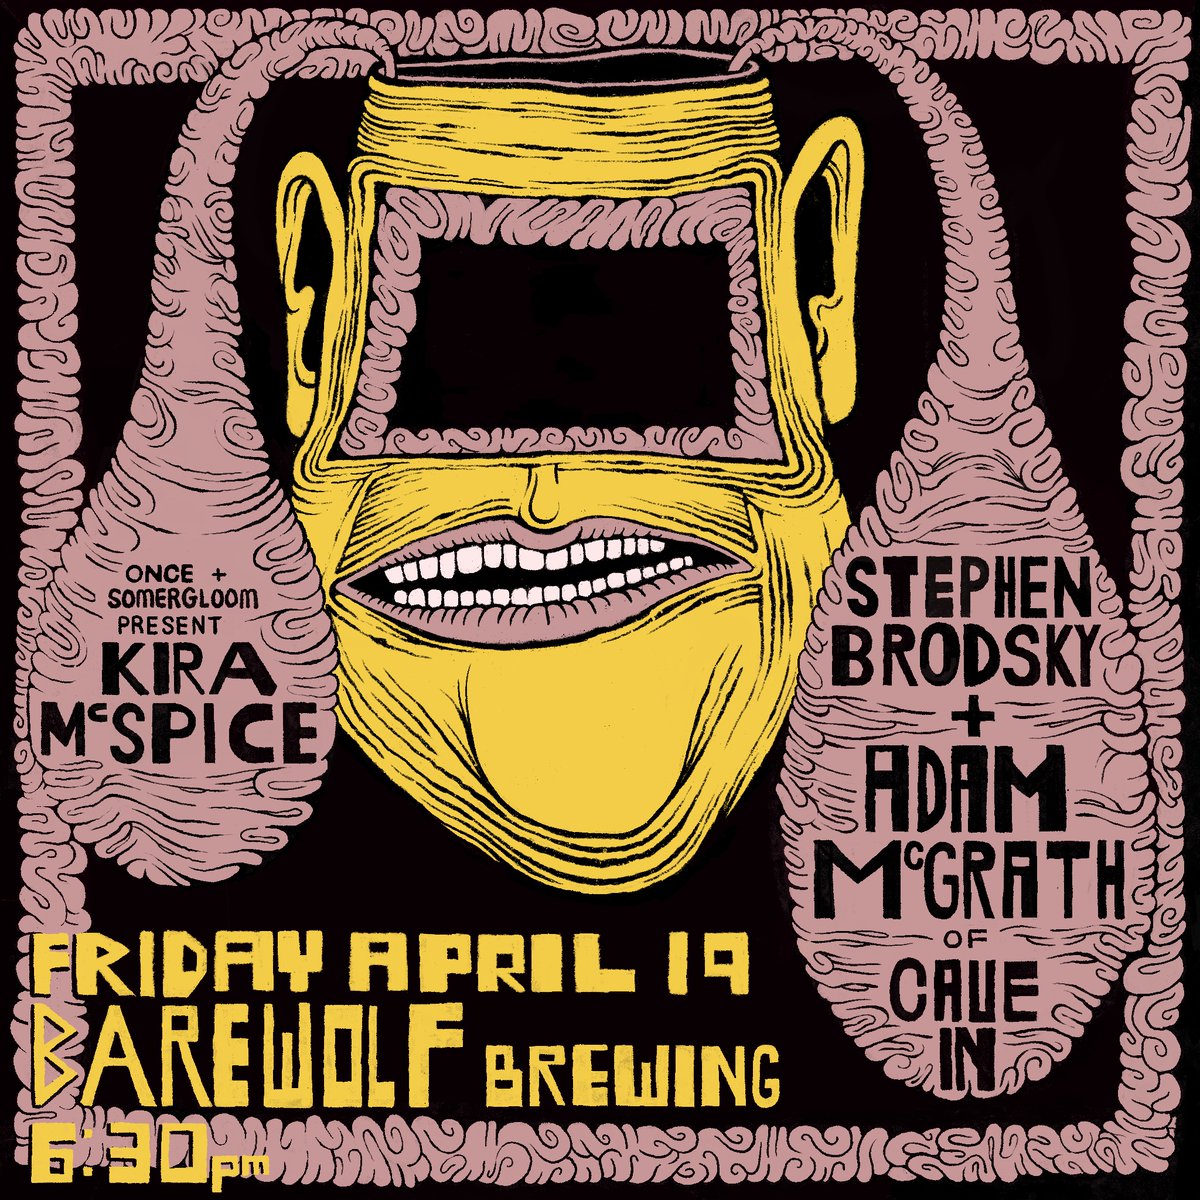 New show! 4/19 Stephen Brodsky and Adam McGrath of Cave In with Kira McSpice at BareWolf Brewing Tickets are on sale..... now! link.dice.fm/Qeacc58ae2f9 Art by Marissa Paternoster 🖤🖤🖤 #CaveIn #StephenBrodsky #AdamMcGrath #KiraMcSpice #BareWolfBrewing #Boston #brewery